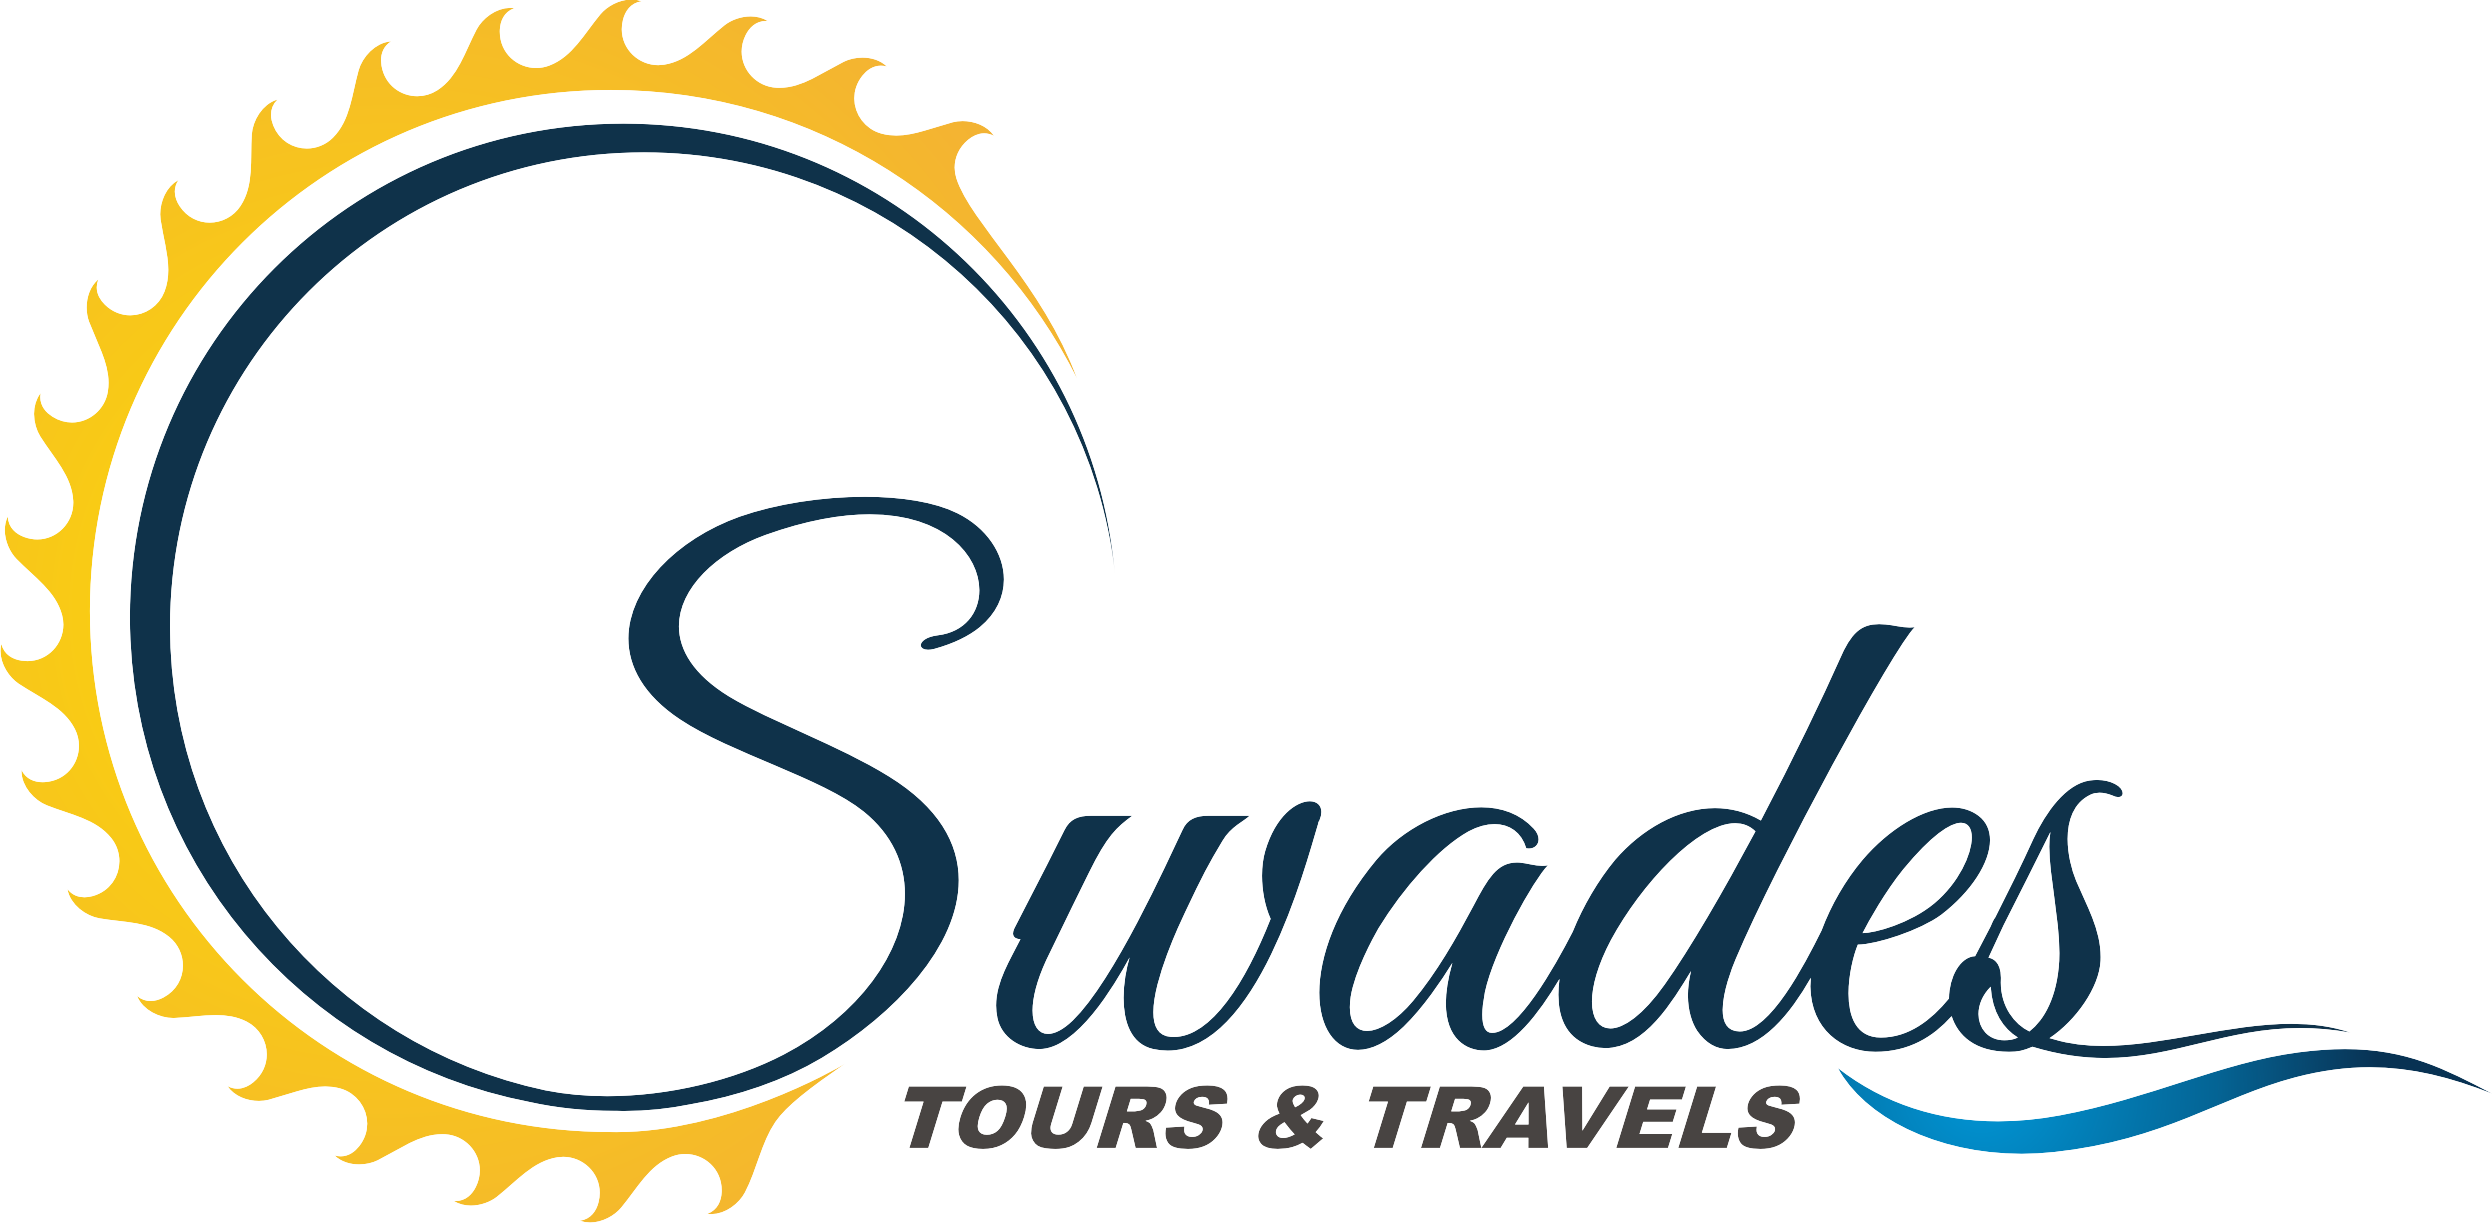 2492 X 1223 1 - Tours And Travels Companies (2492x1223)